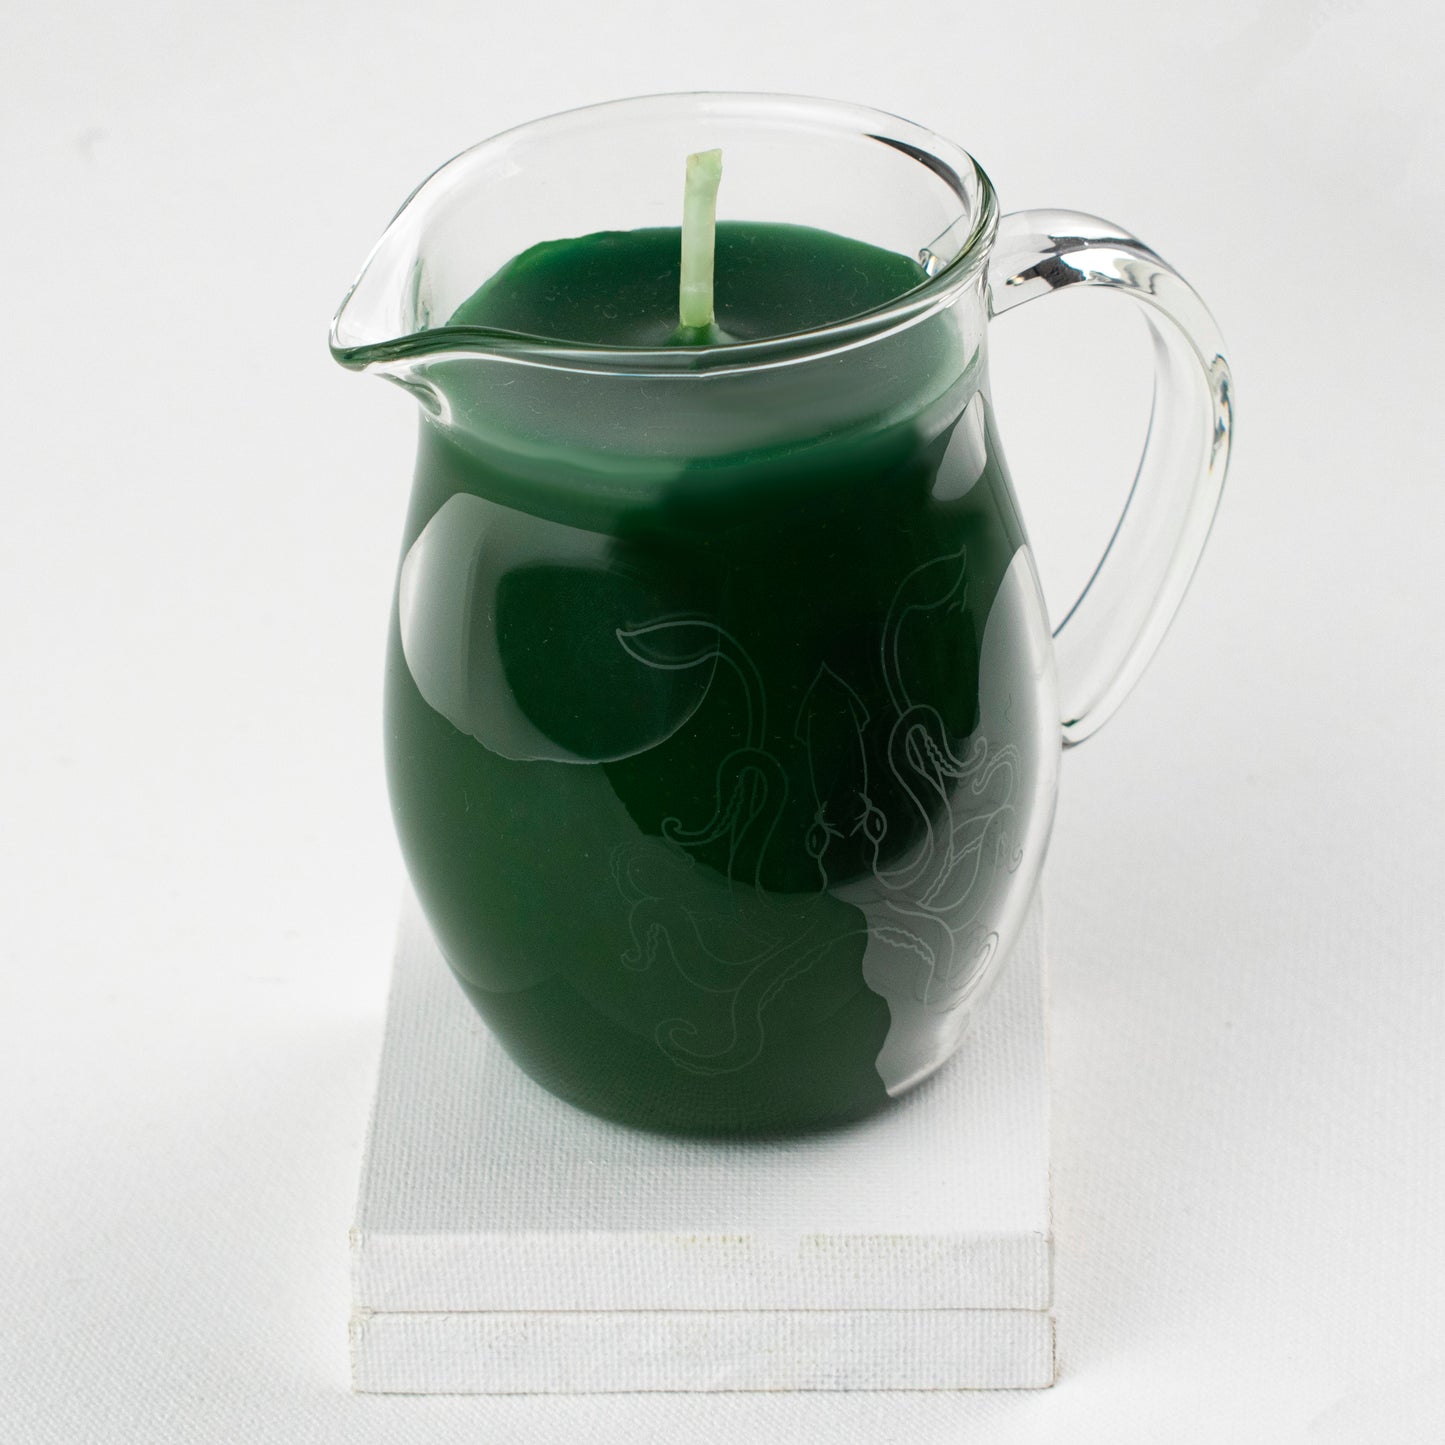 Classic Wax Play Pitcher Candle - Low Temp - Unscented - Paraffin